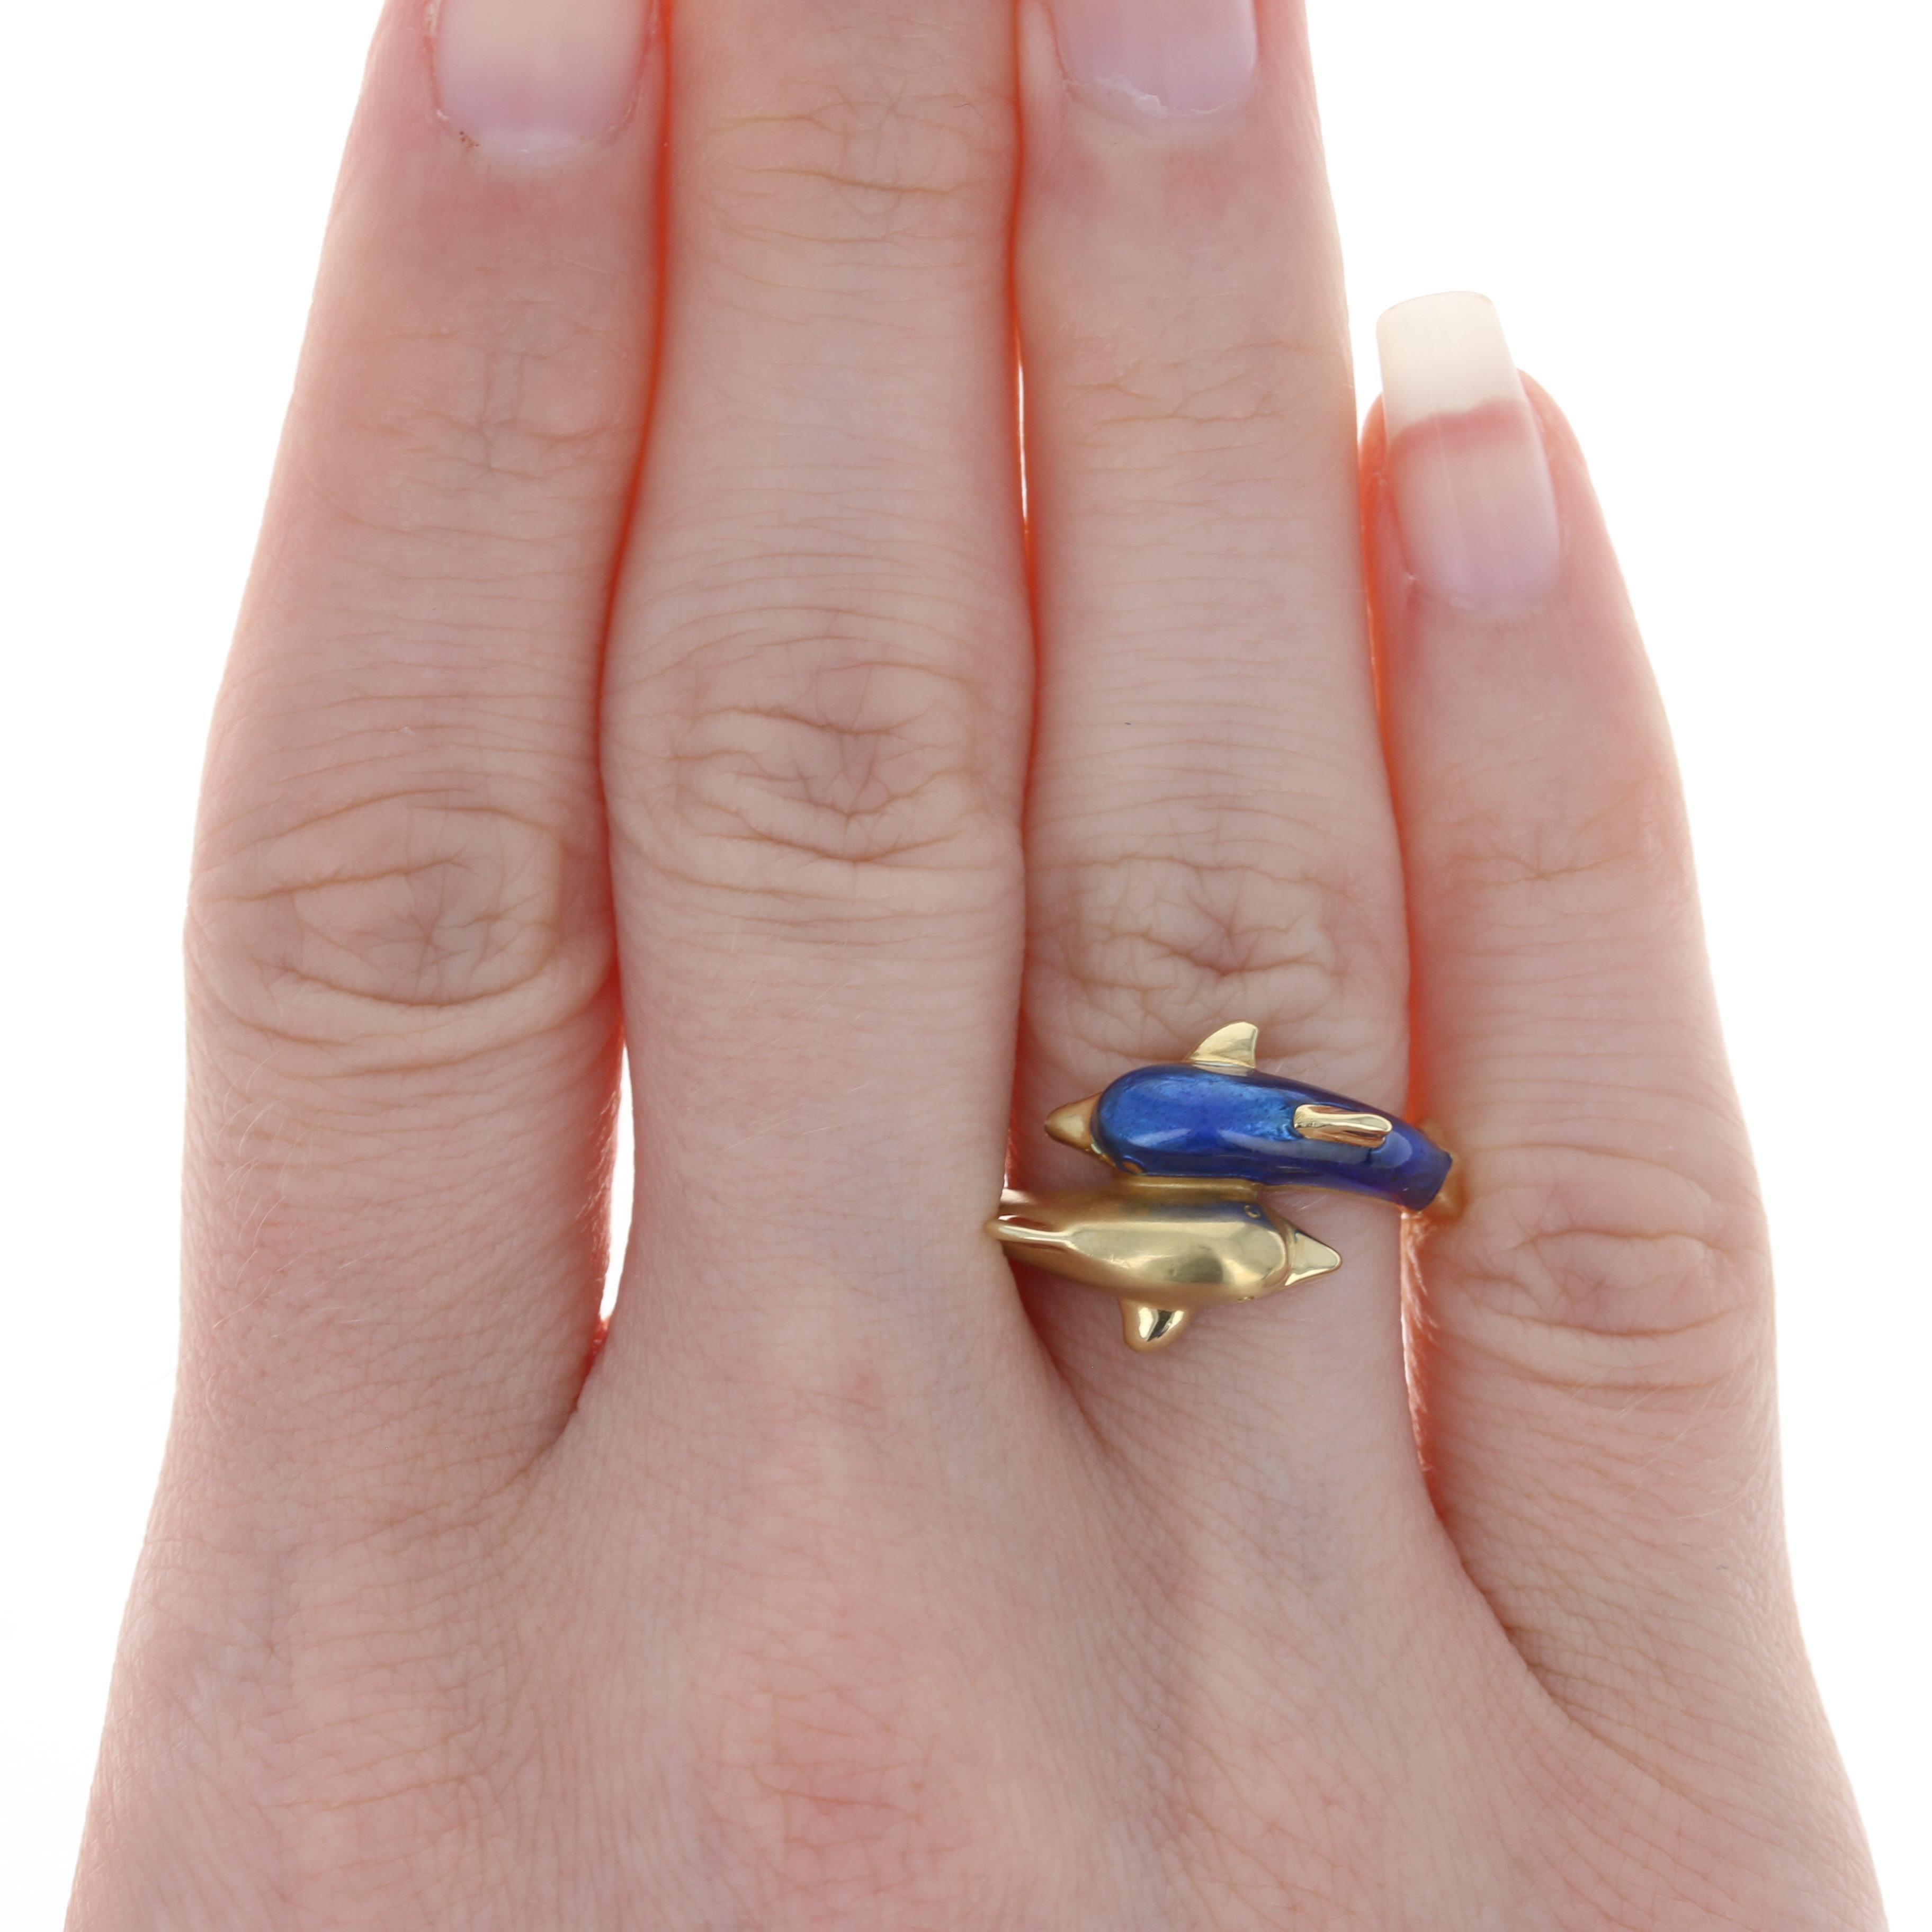 Whether you're by the sea or dreaming to be, this enchanting creation by Susy Mor is the perfect addition to your jewelry collection! Crafted in the United States, this luxurious 18k yellow gold bypass ring showcases one dolphin adorned with